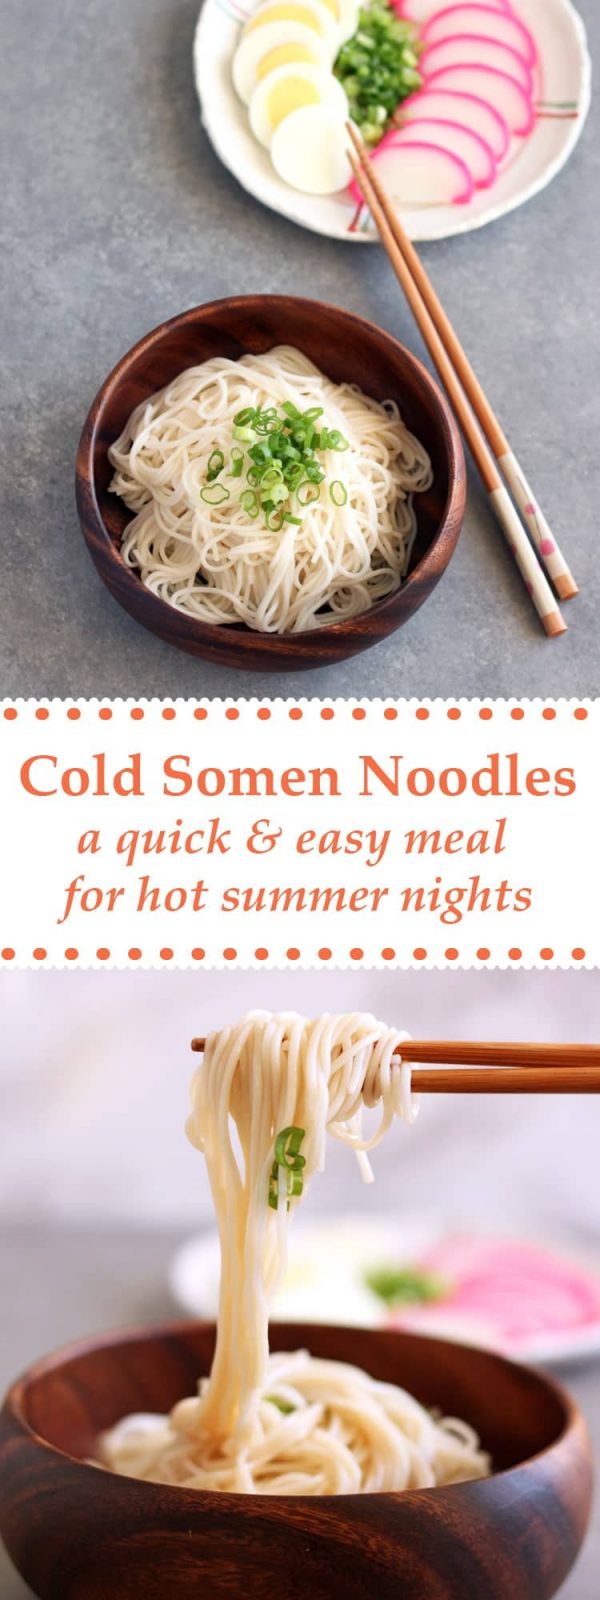 Quick & Easy Cold Somen Noodles - All She Cooks